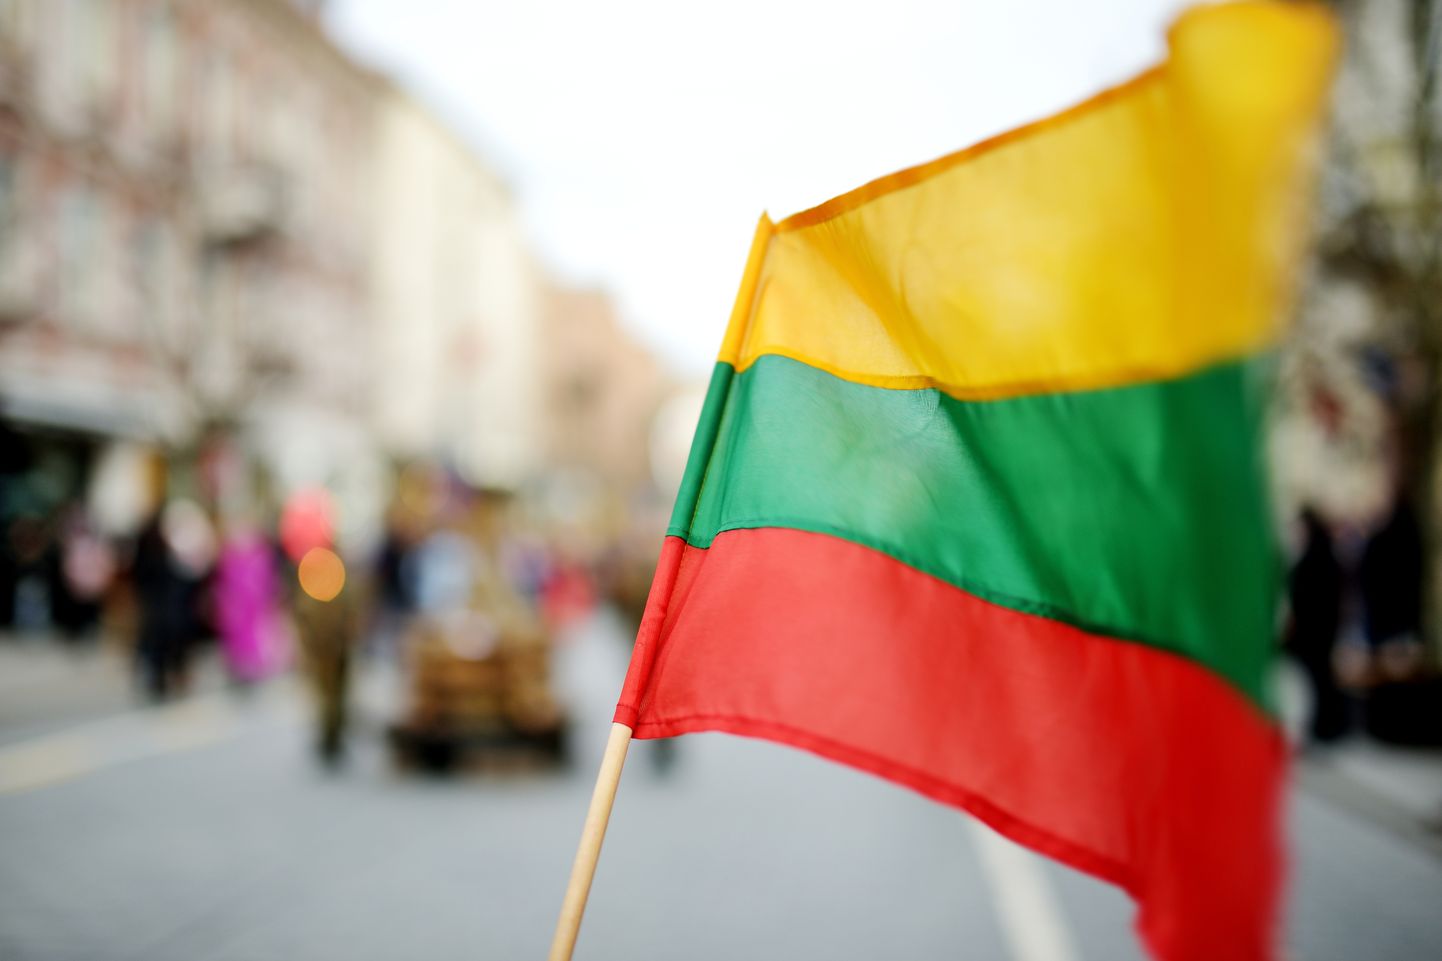 Lithuanian flag hold during celebration of Restoration of the State Day in Vilnius. Bonfires are lit on Gediminas avenue on festive night on February 16.